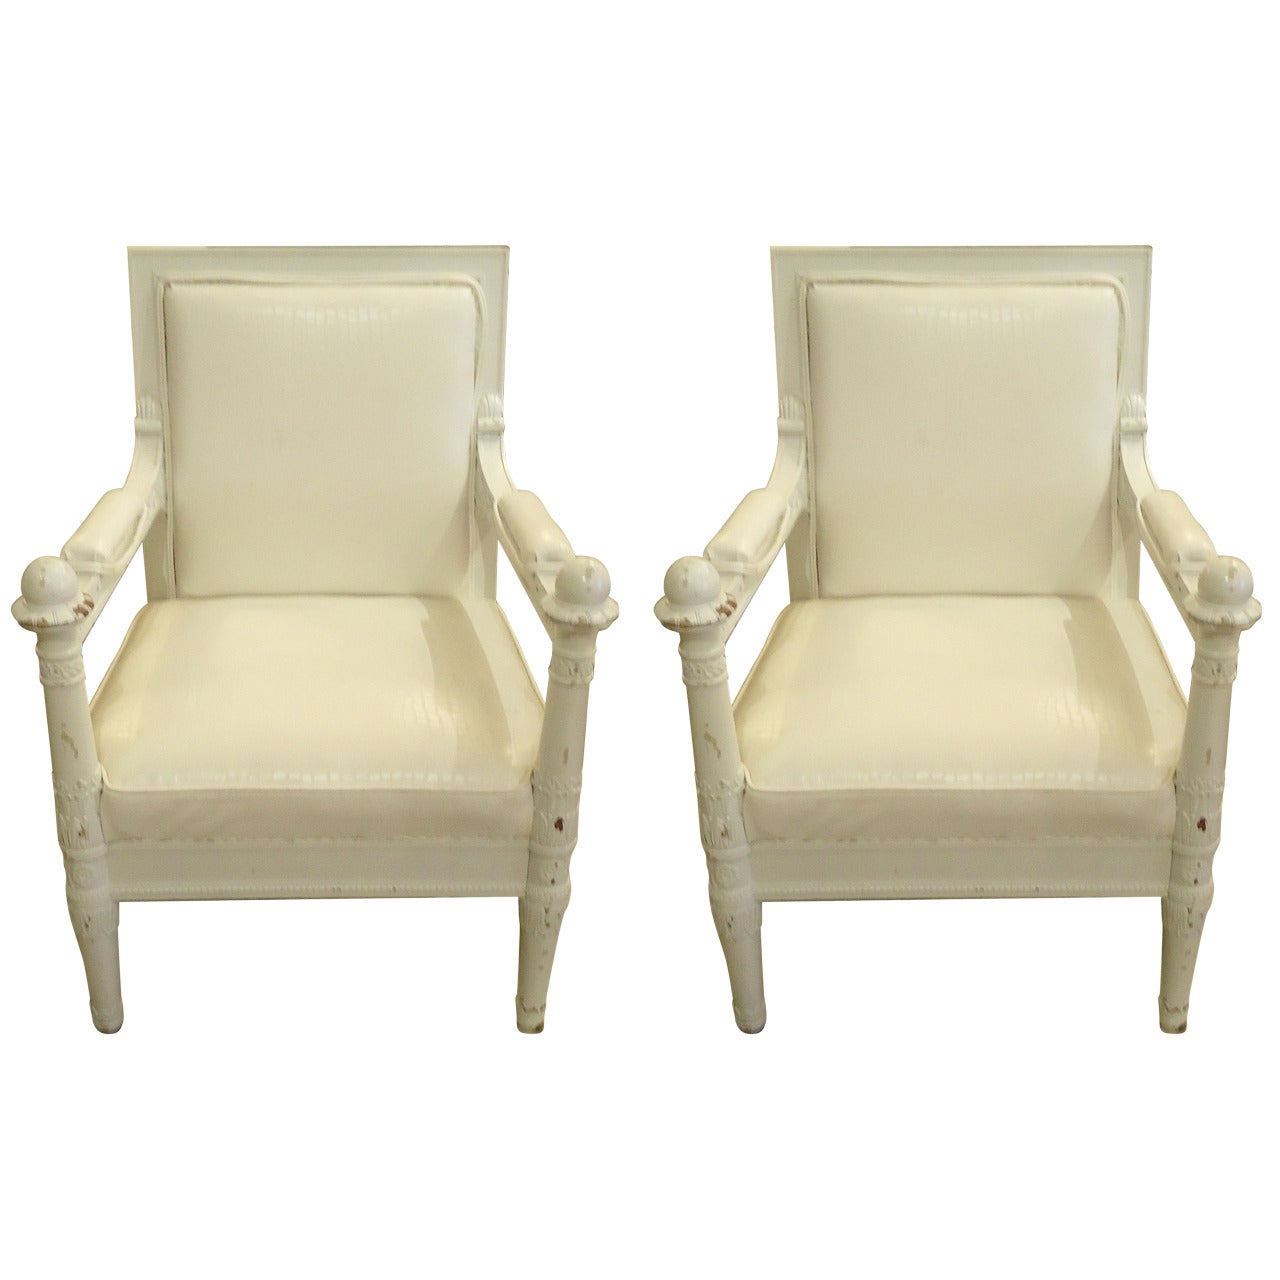 Pair of Carved Wood White on White Throne Chairs